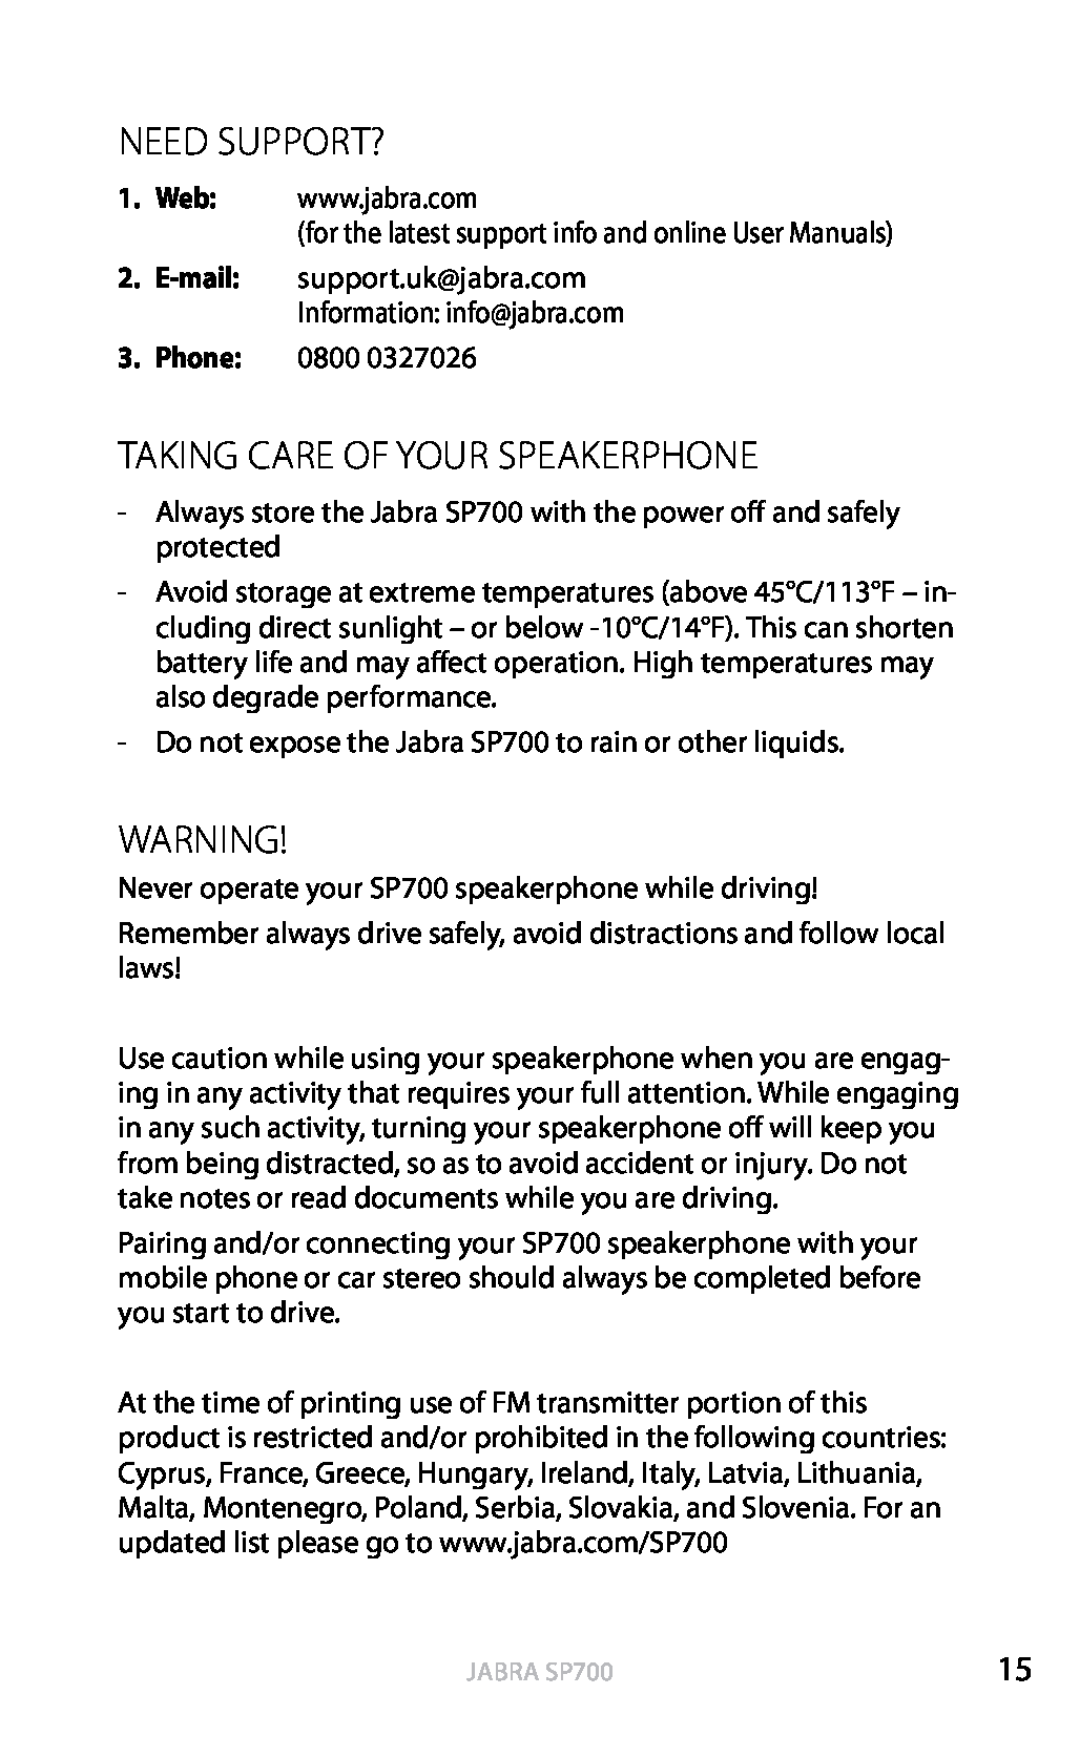 Lennox Hearth SP700 user manual Need support?, Taking care of your Speakerphone, english 